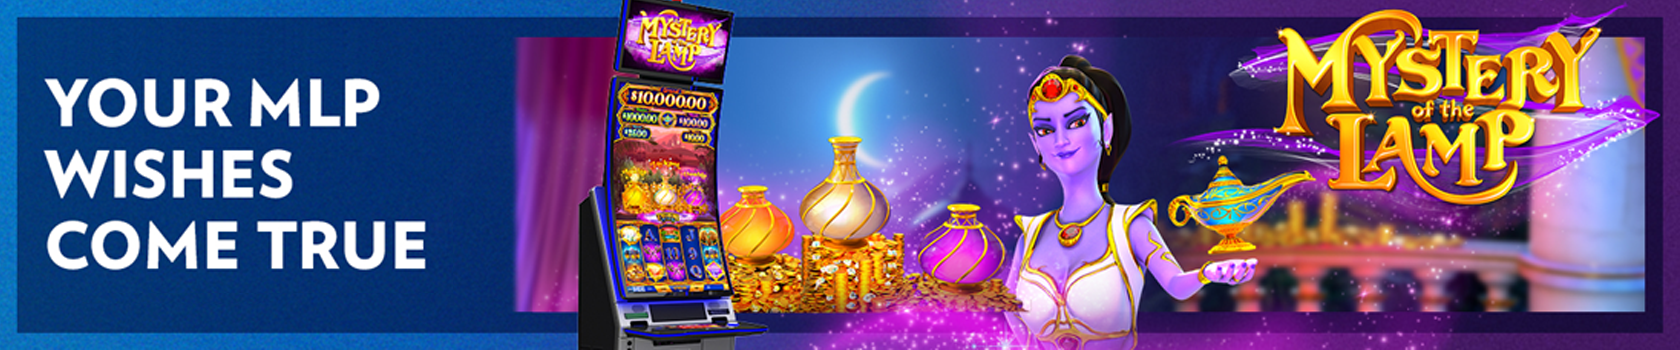 your MLP wishes come true with IGT's Mystery of the Lamp Genie and the PeakCurve49 slot cabinet